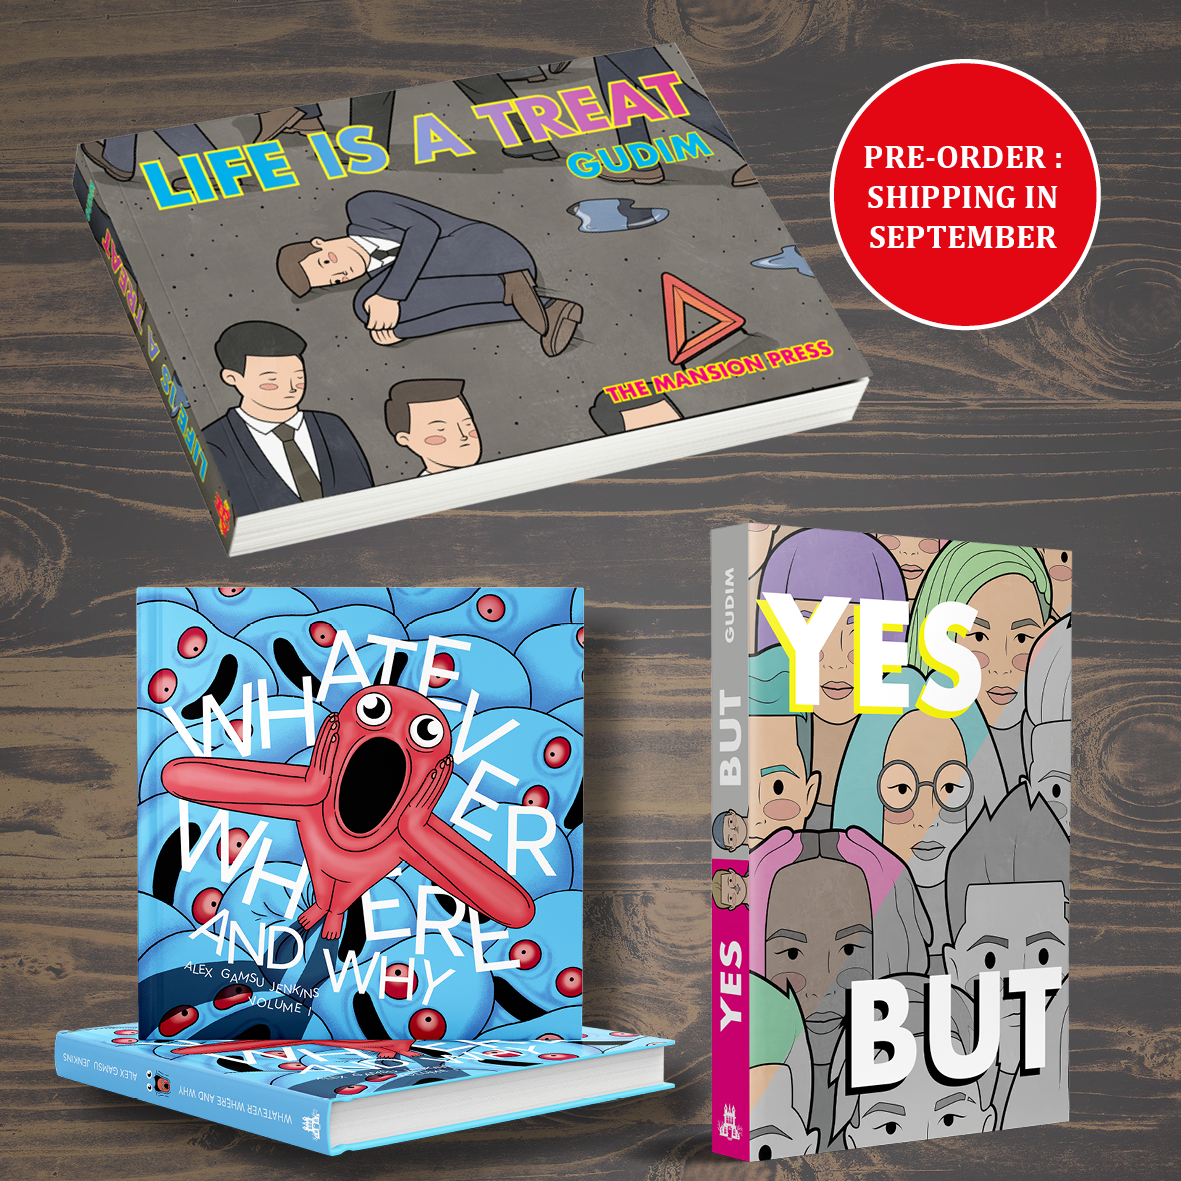 Absurd Comics Bundle : Life is a treat + Yes, But By Gudim + Whatever Where and Why by Alex Gamsu Jenkins